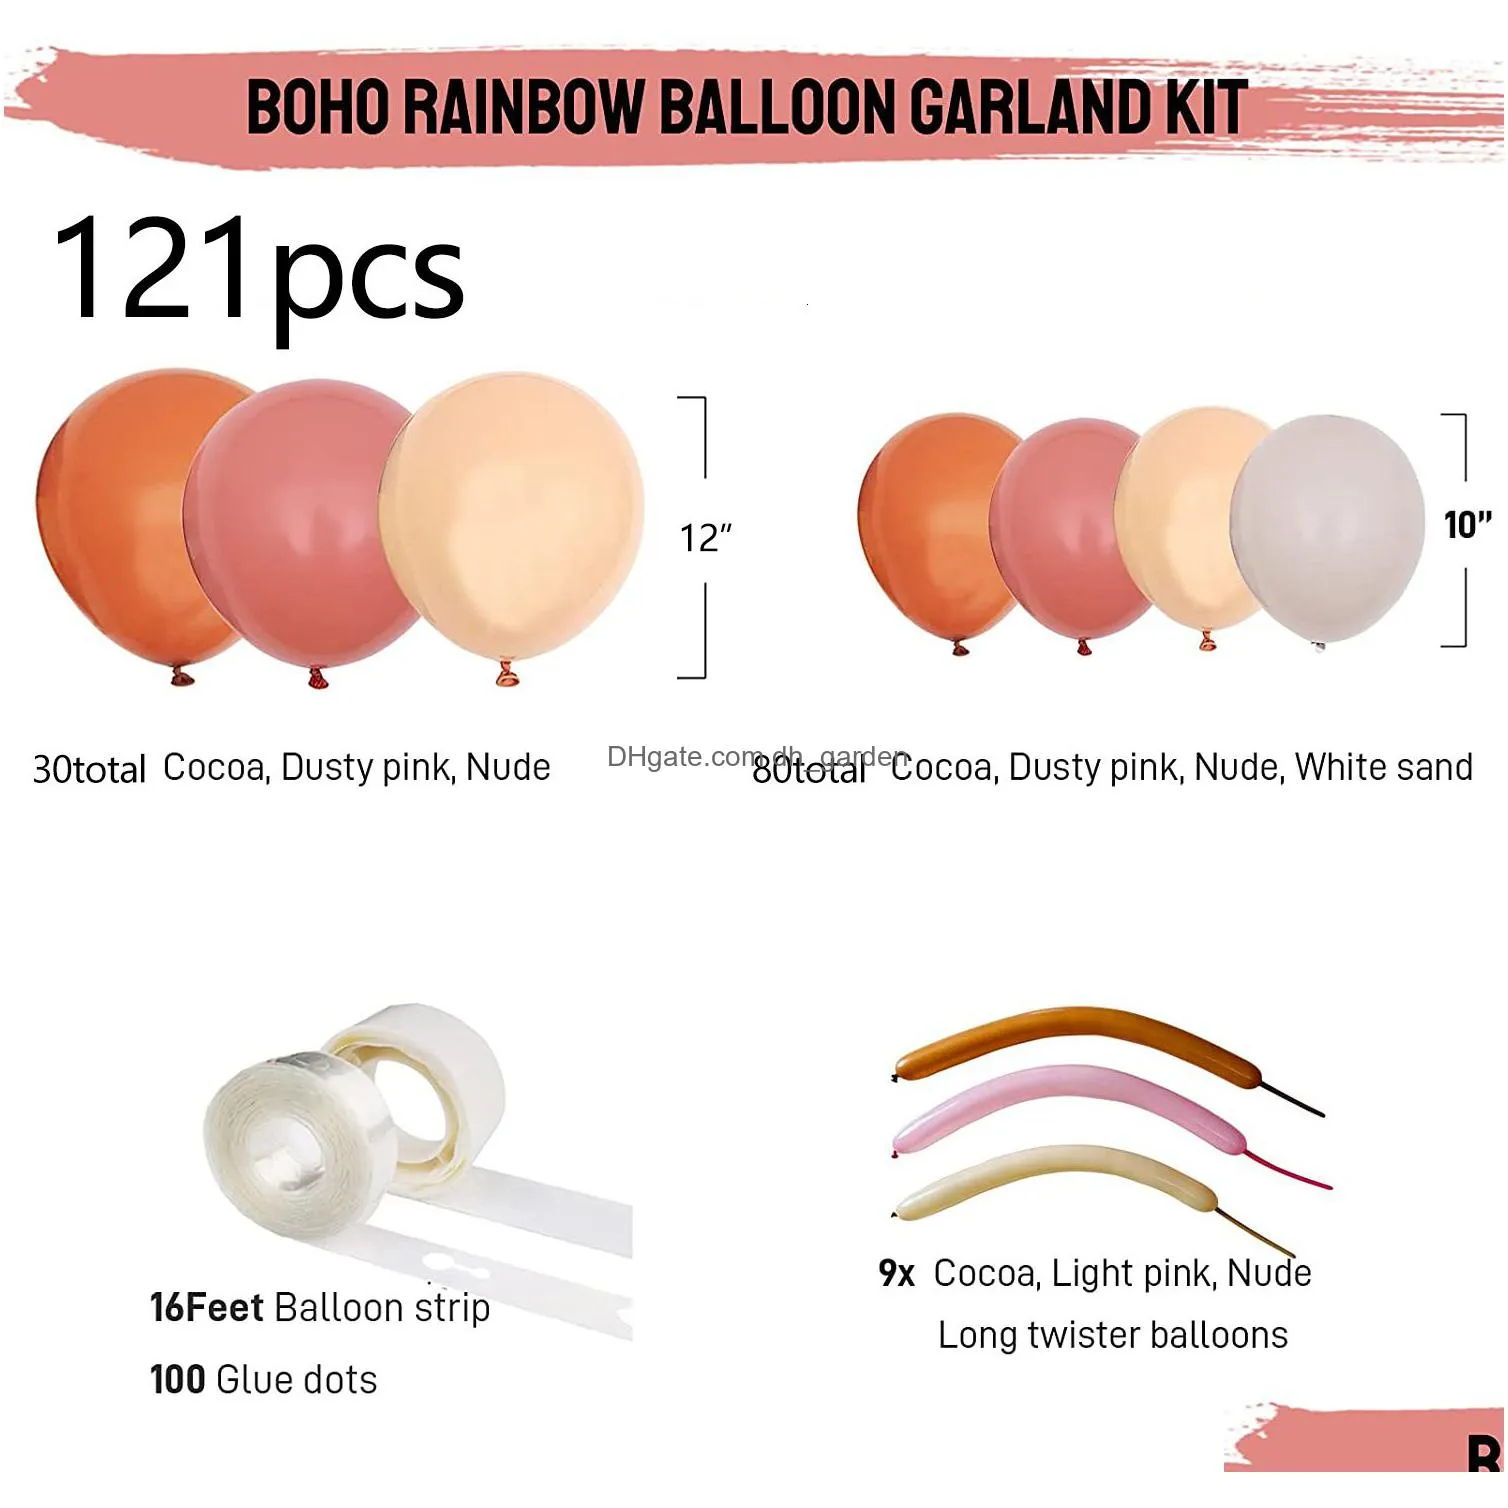 Other Event & Party Supplies Other Event Party Supplies Boho Rainbow Blush Balloons Garland Arch Kit Peach Pastel Apricot La Dhgarden Dhlzc